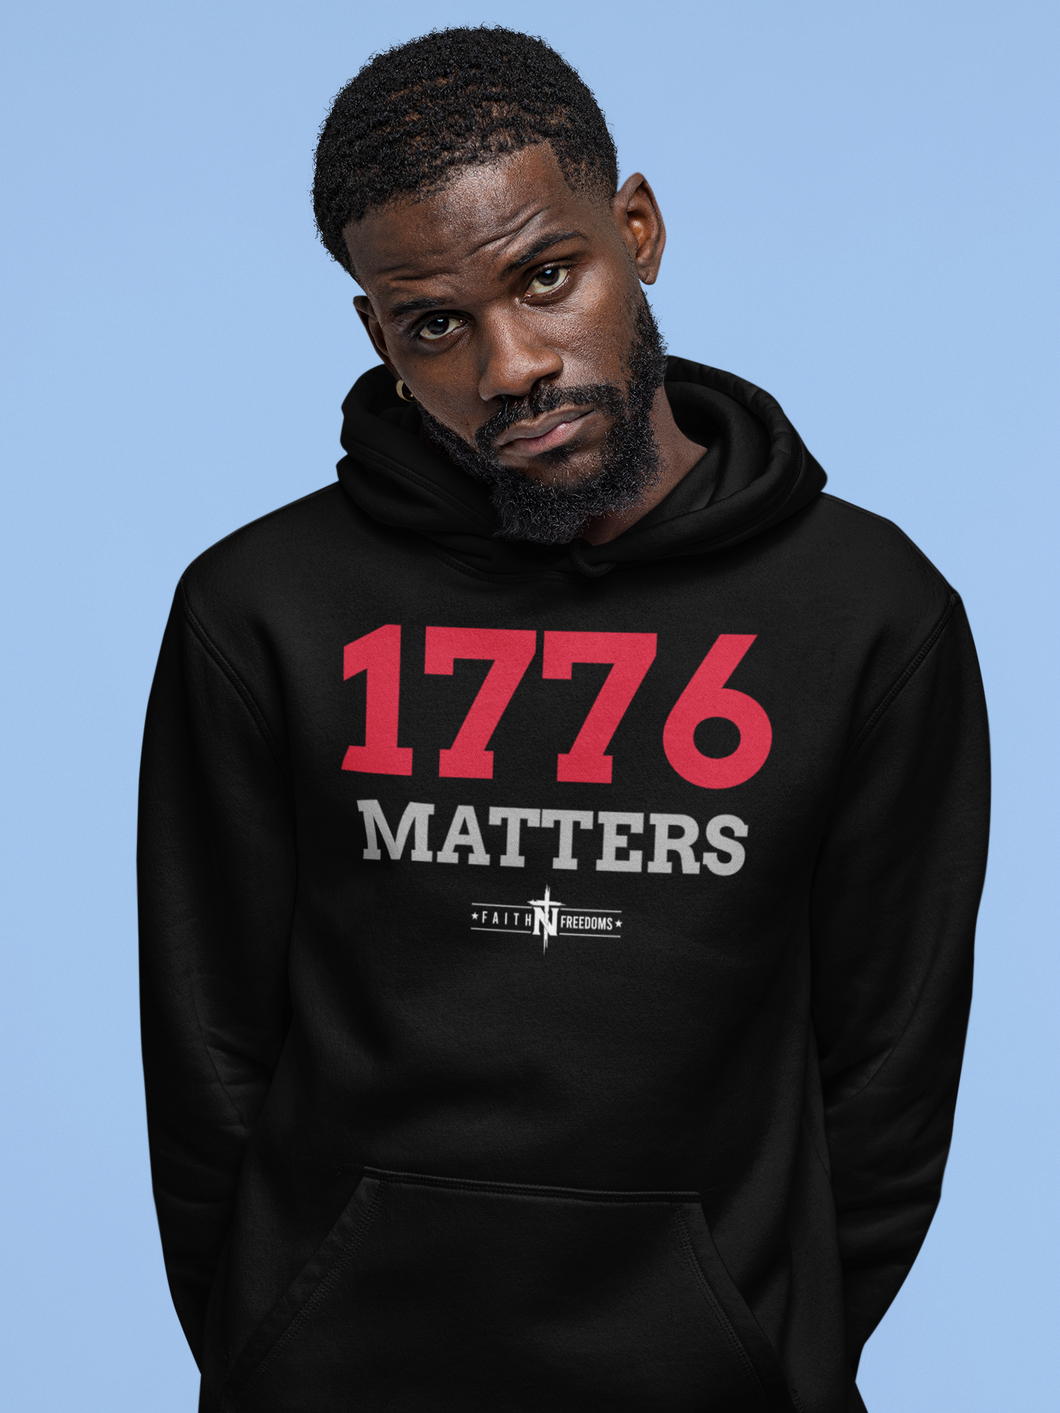 New 1776 Matters Hoodie by FaithNFreedoms